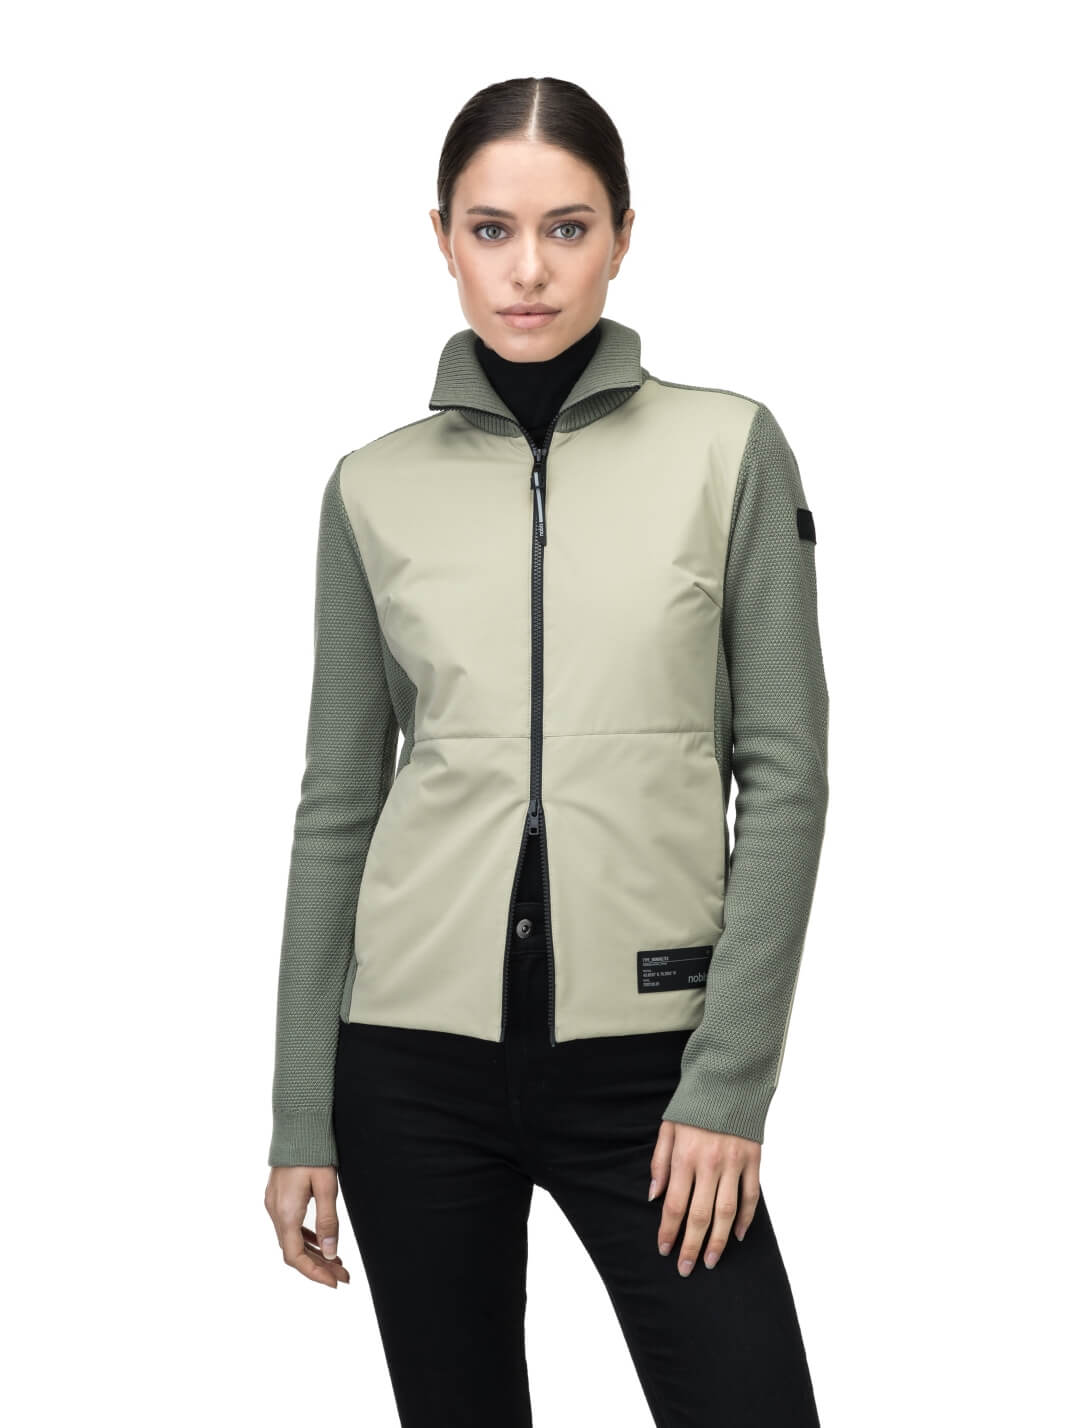 Evo Ladies Performance Full Zip Sweater in hip length, Primaloft Gold Insulation Active+, Merion wool knit collar, sleeves, back, and cuffs, two-way front zipper, and hidden waist pockets, in Tea